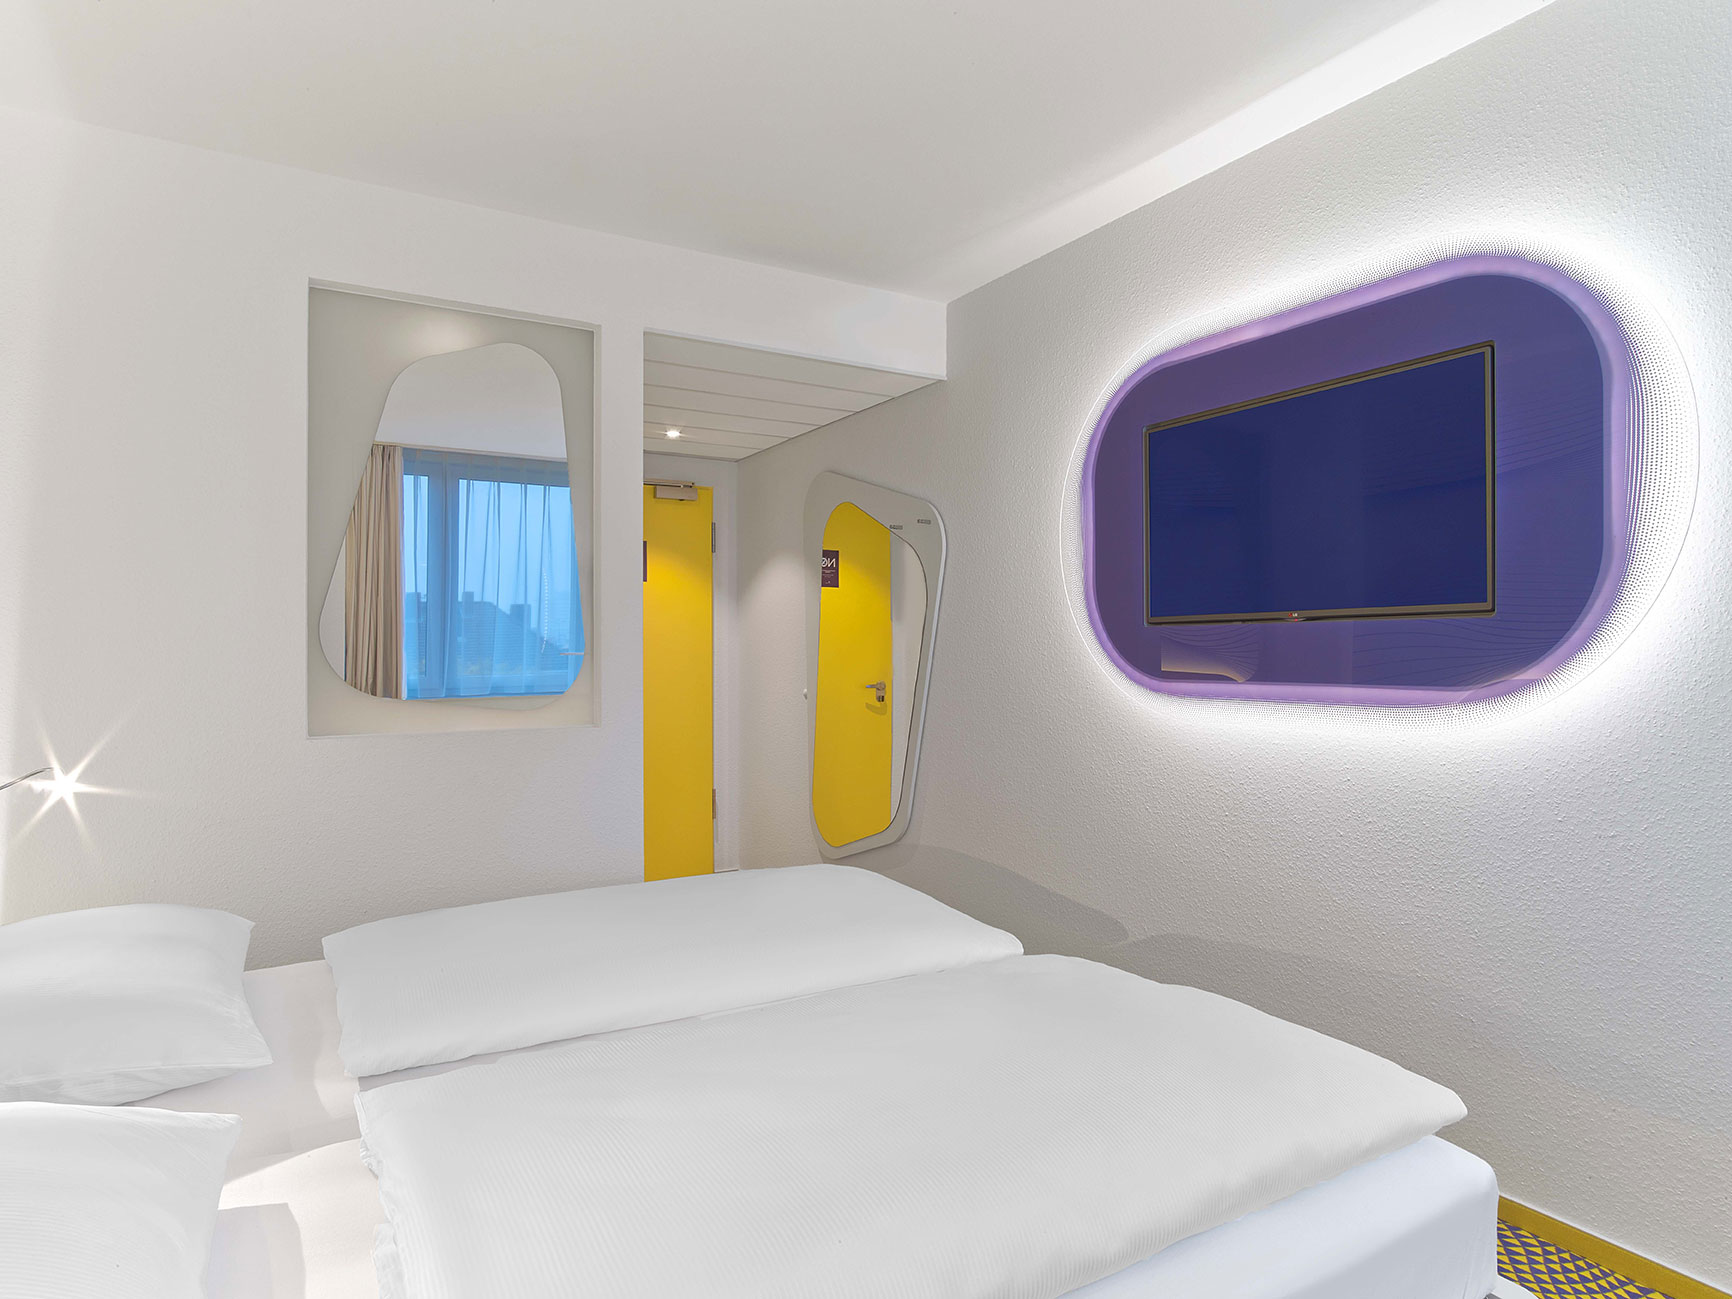 Design hotel room with a double bad, a TV and a curved mirror